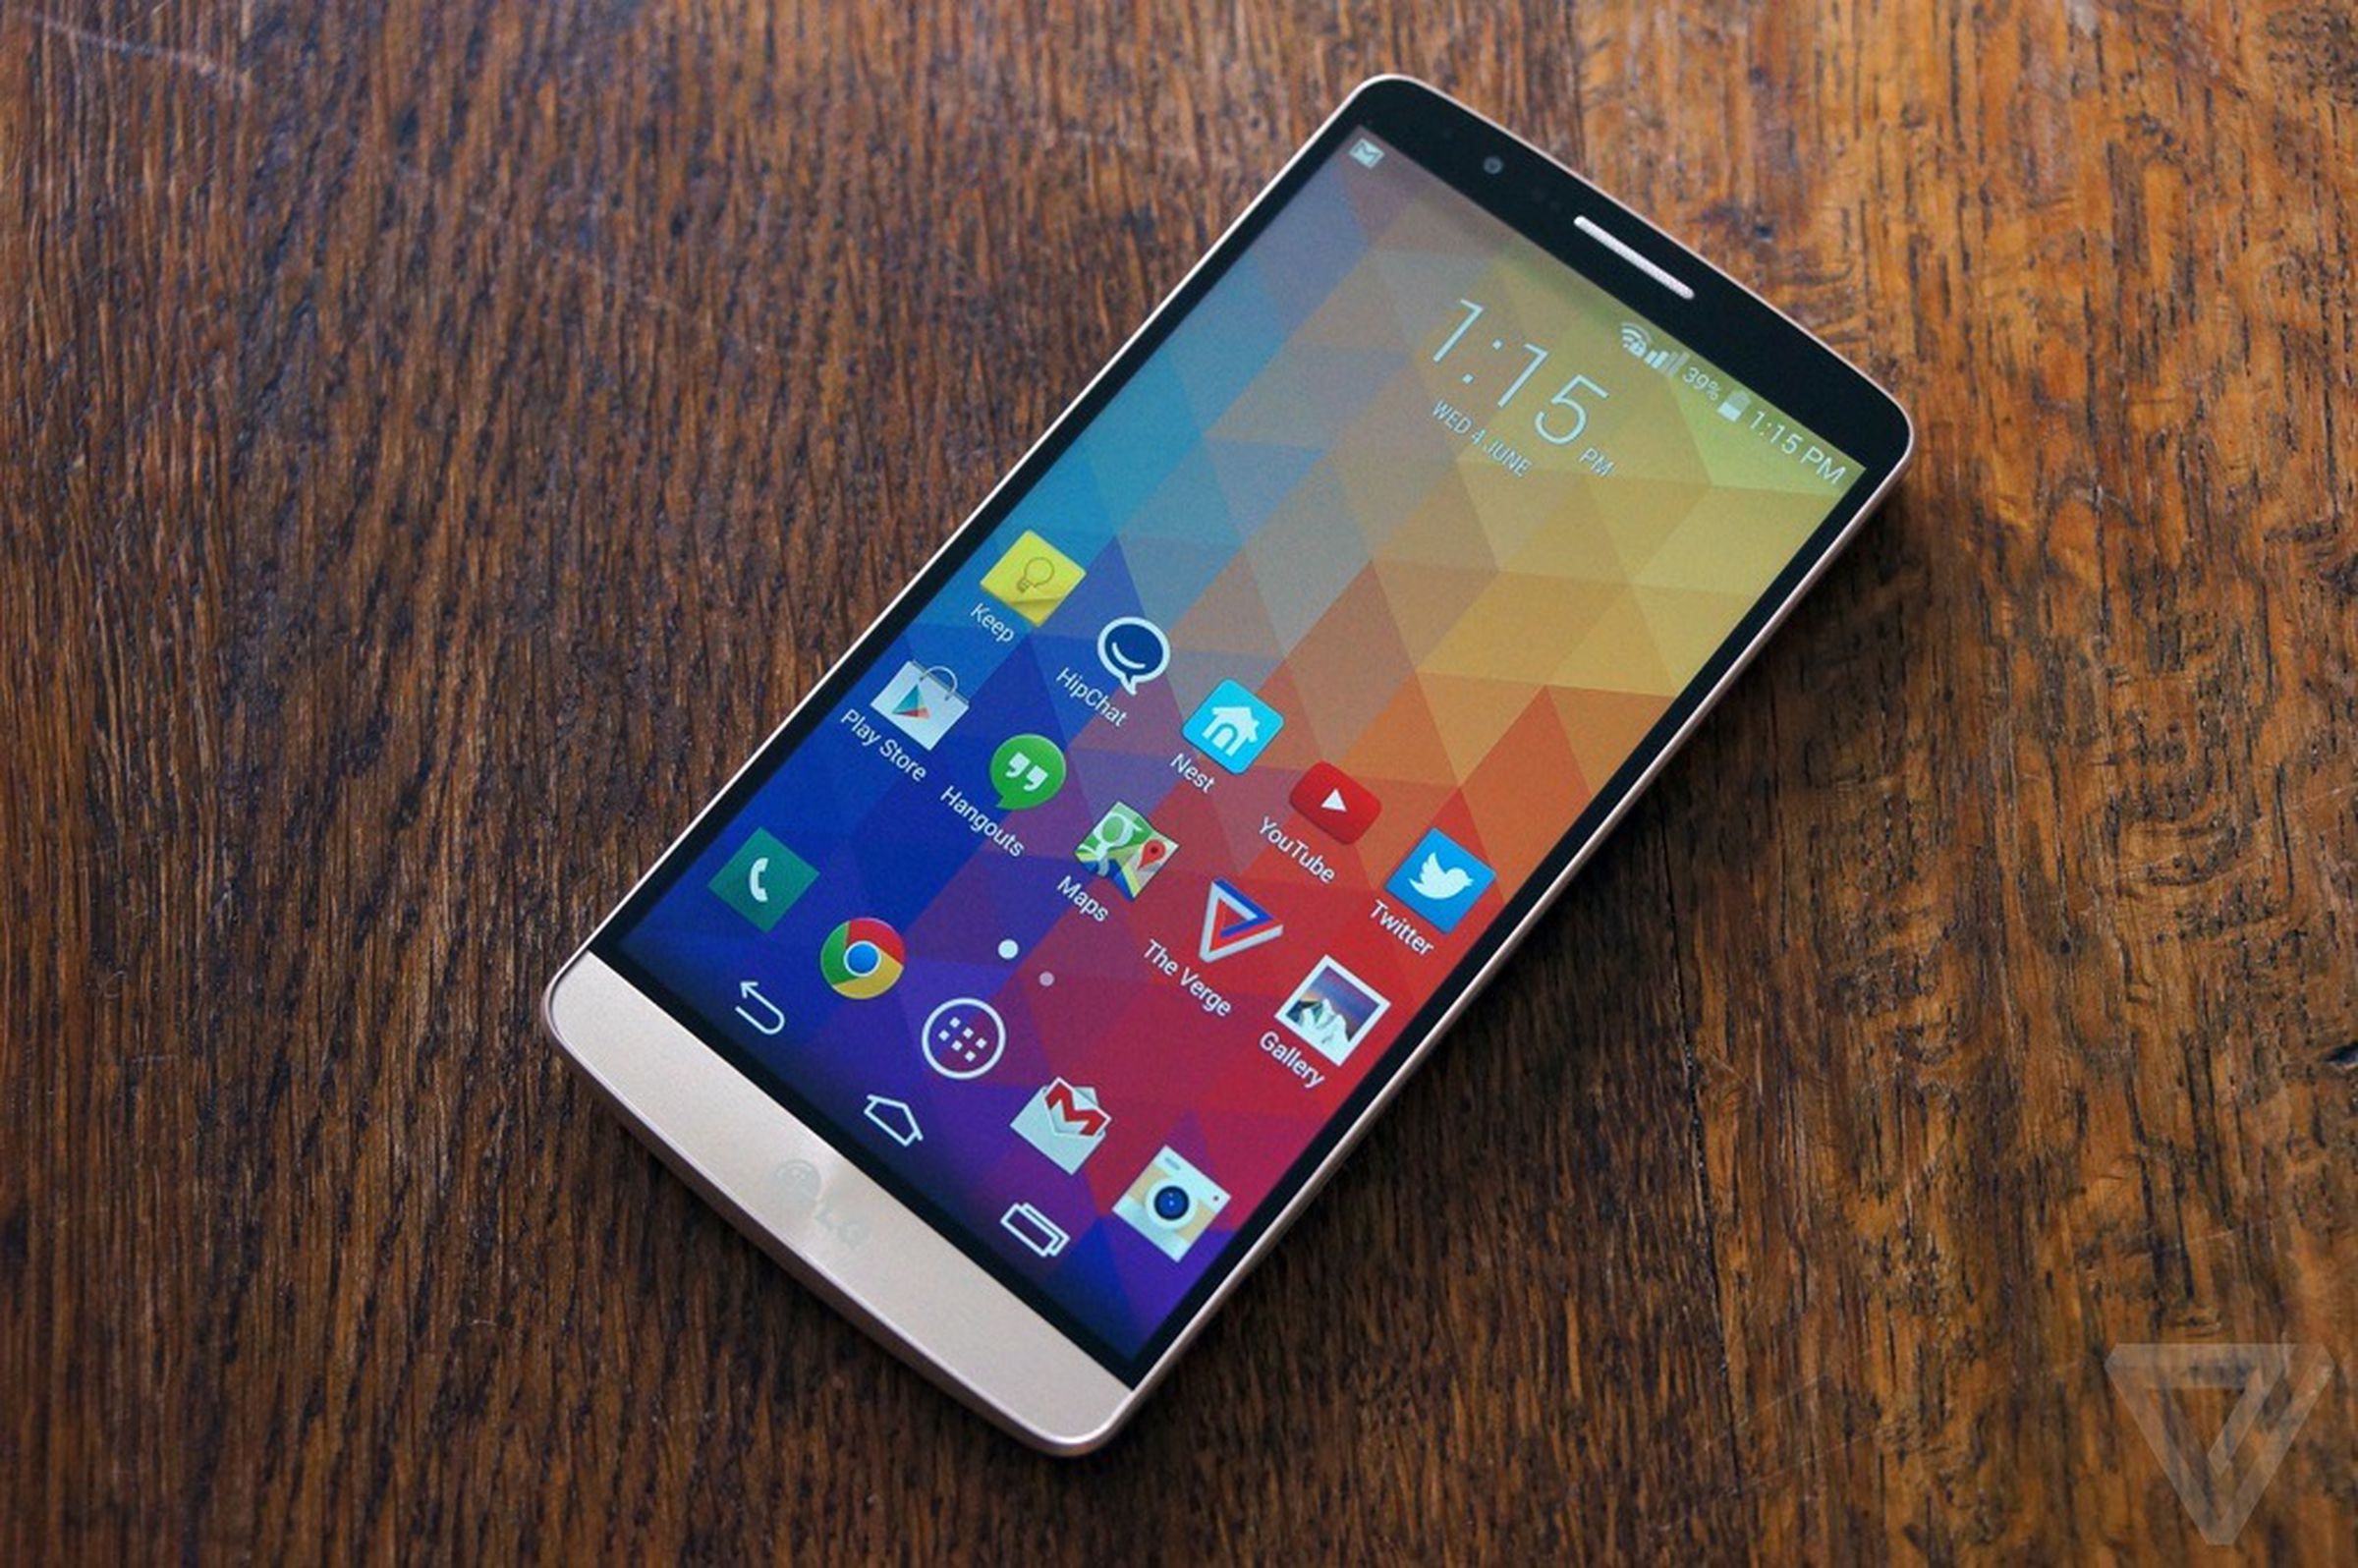 LG G3 hands-on gallery